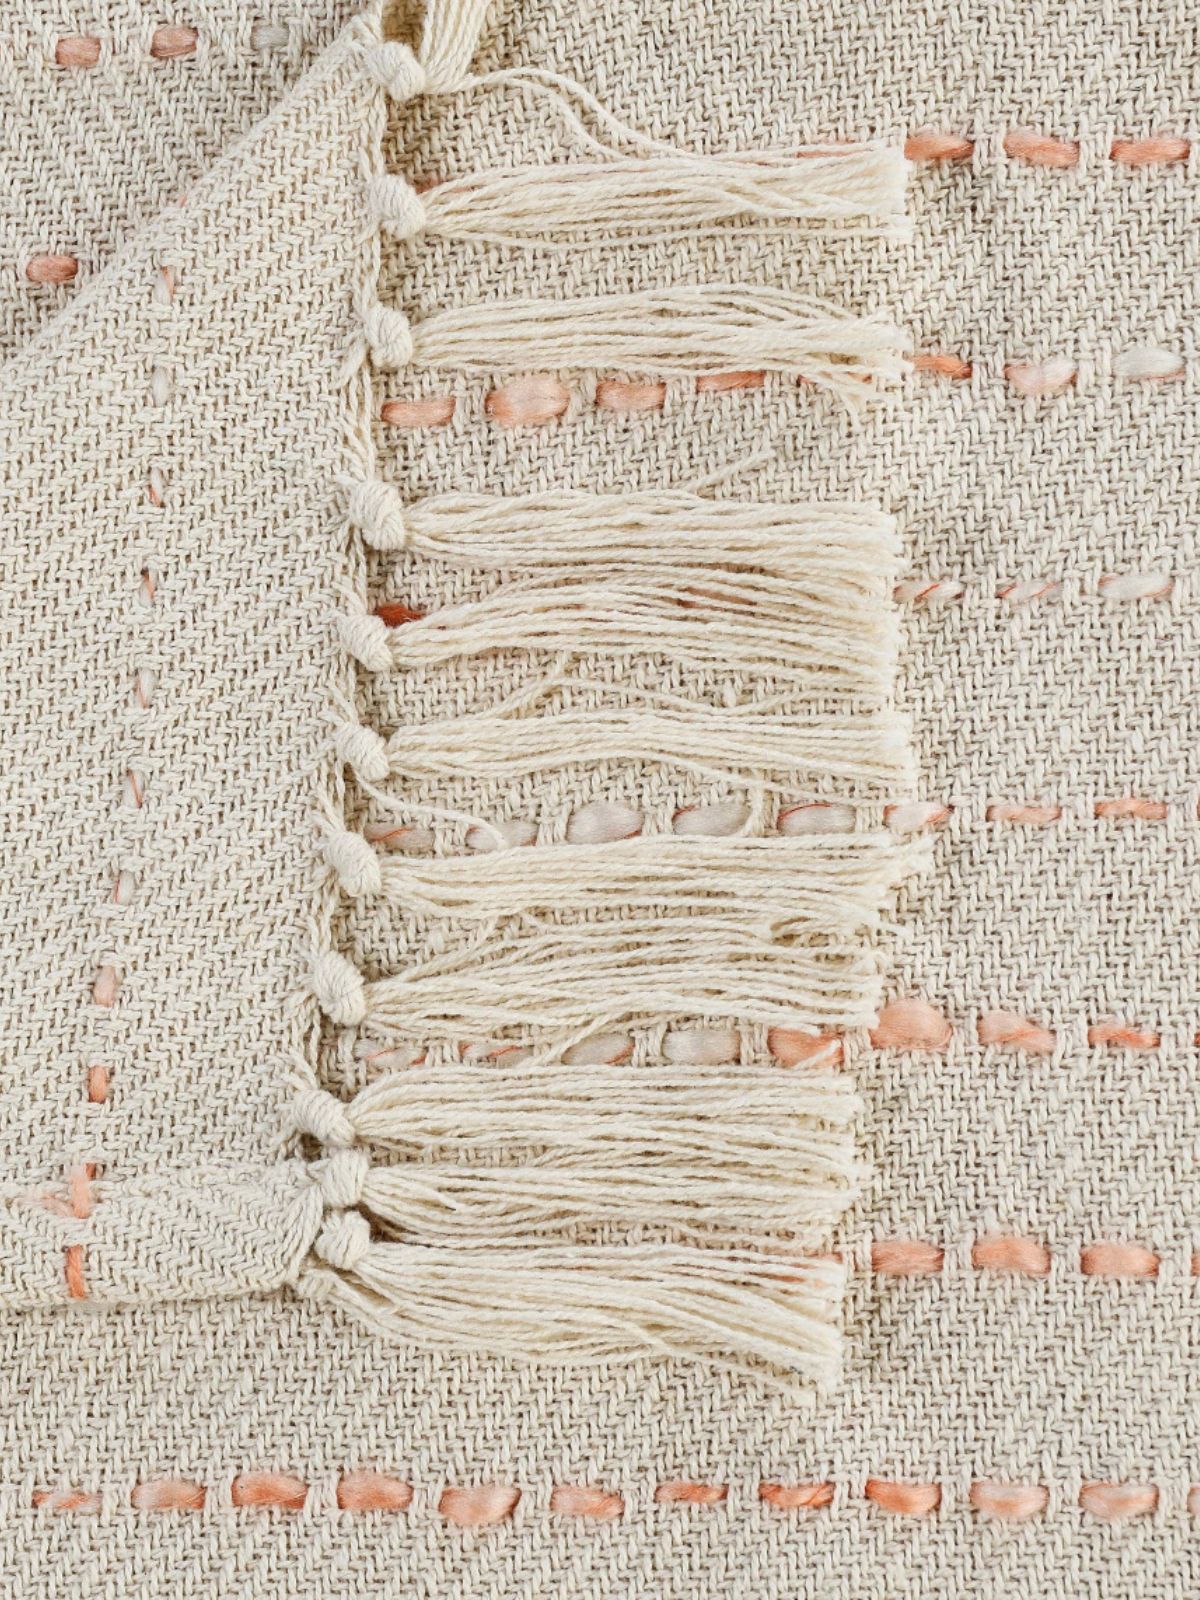 Peach Stripe Woven Cotton Throw Blanket with Fringe, 50W x 60L. Close up.